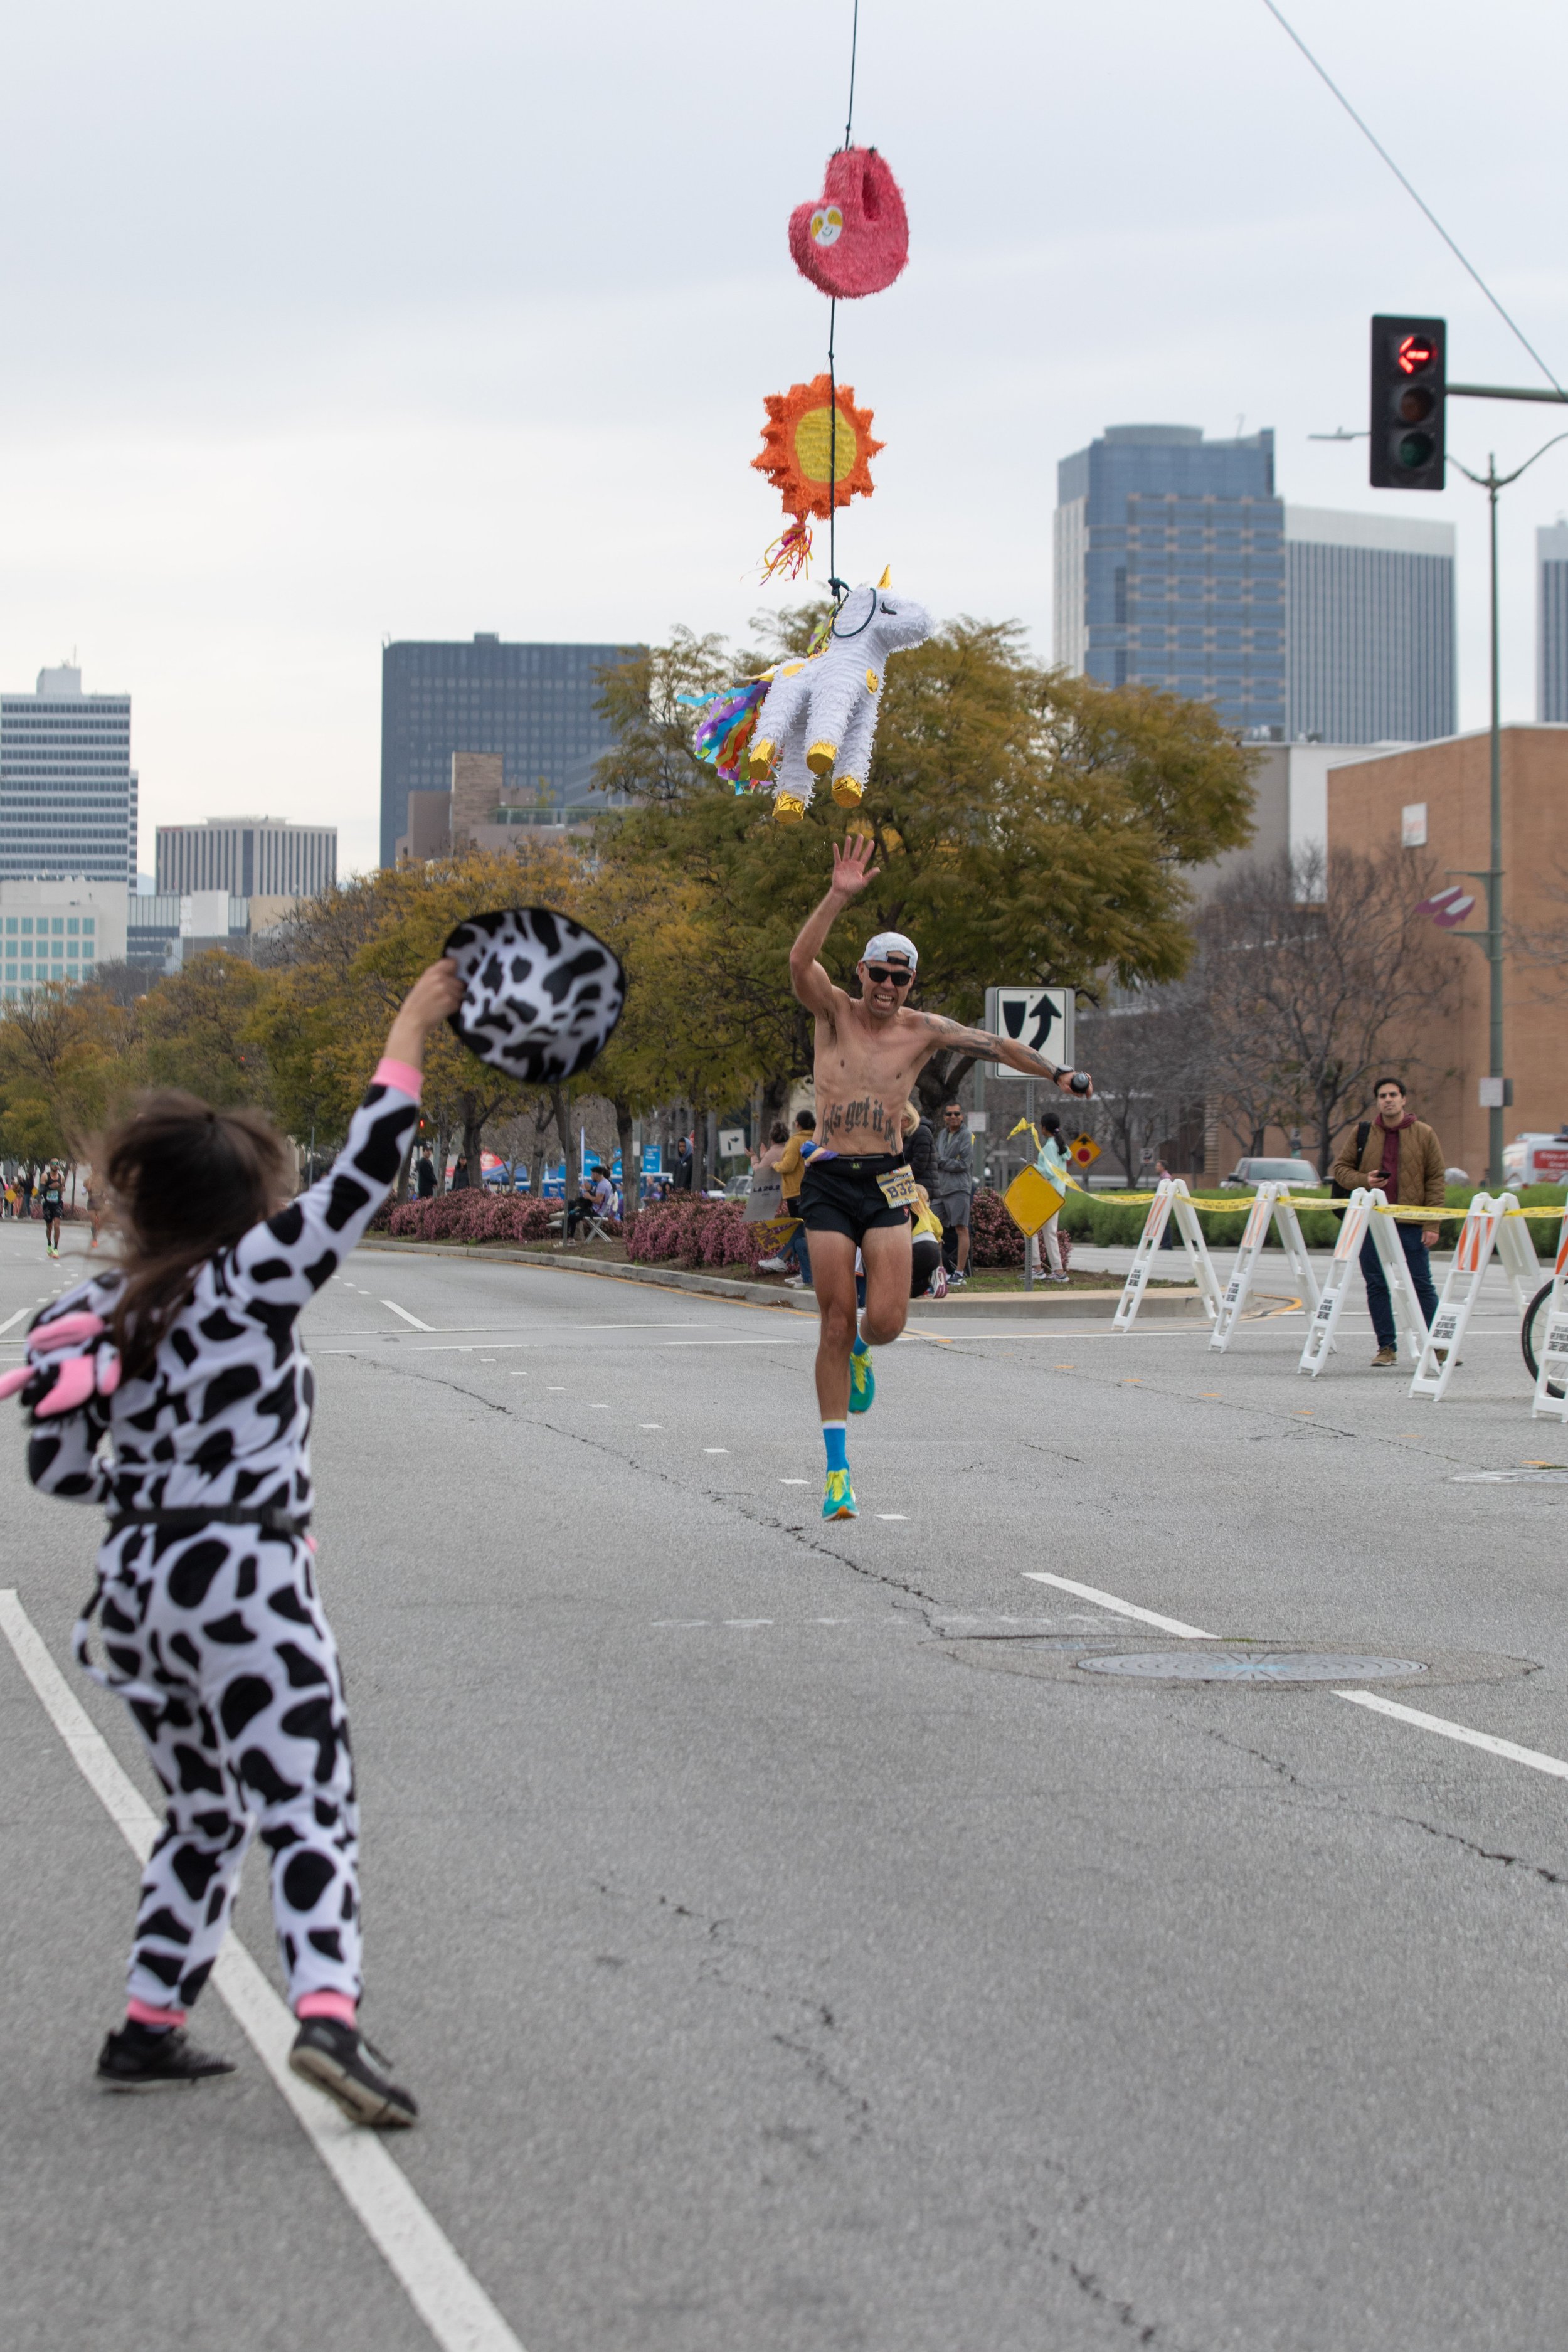  Aracely Rodriguez wearing a cow outfit jumps on excitement when a runner hits the piñata on mile 19 during the L.A. Marathon 2023. Sunday, March 19, 2023. Los Angeles, Calif. (Jorge Devotto | The Corsair) 